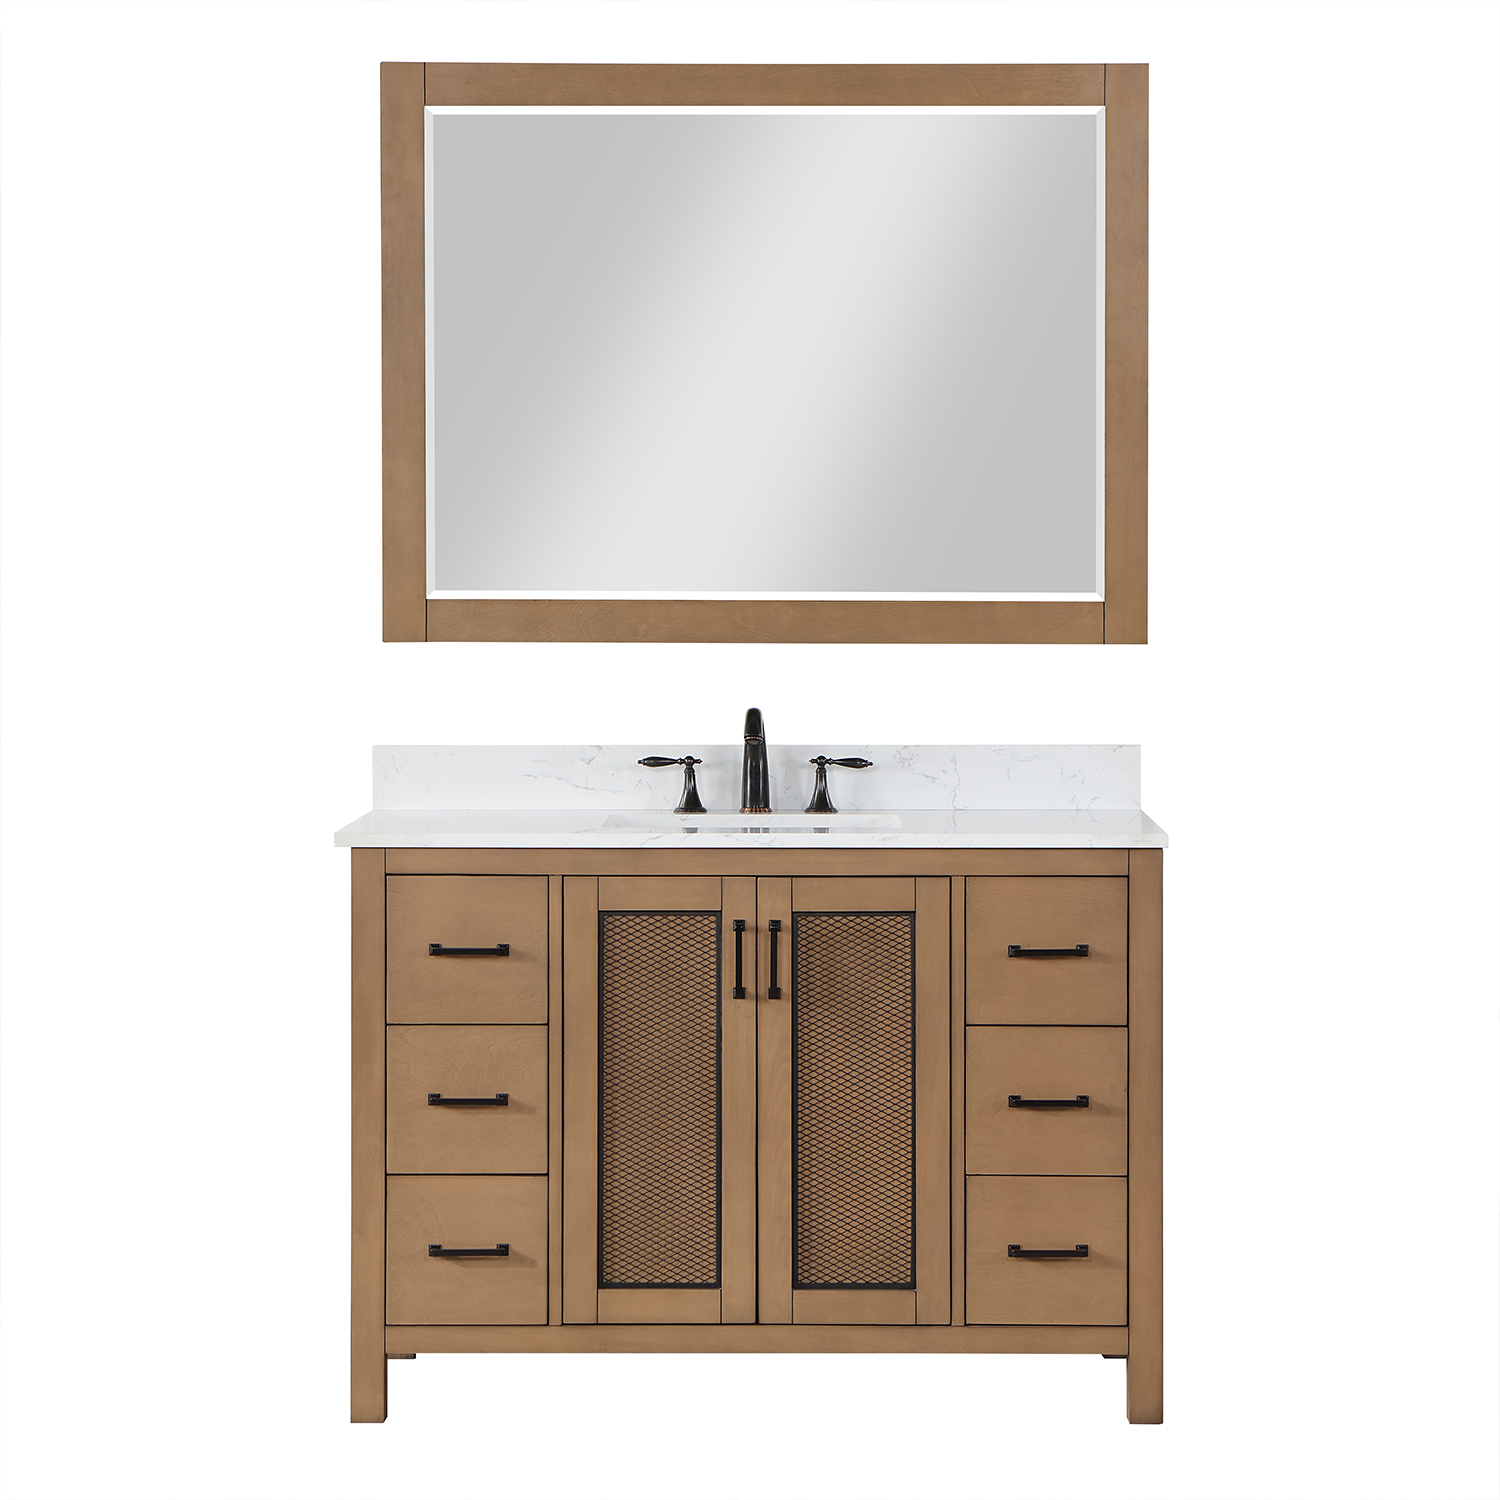 Issac Edwards Collection 48" Single Bathroom Vanity Set in Brown Pine with Carrara White Composite Stone Countertop without Mirror 